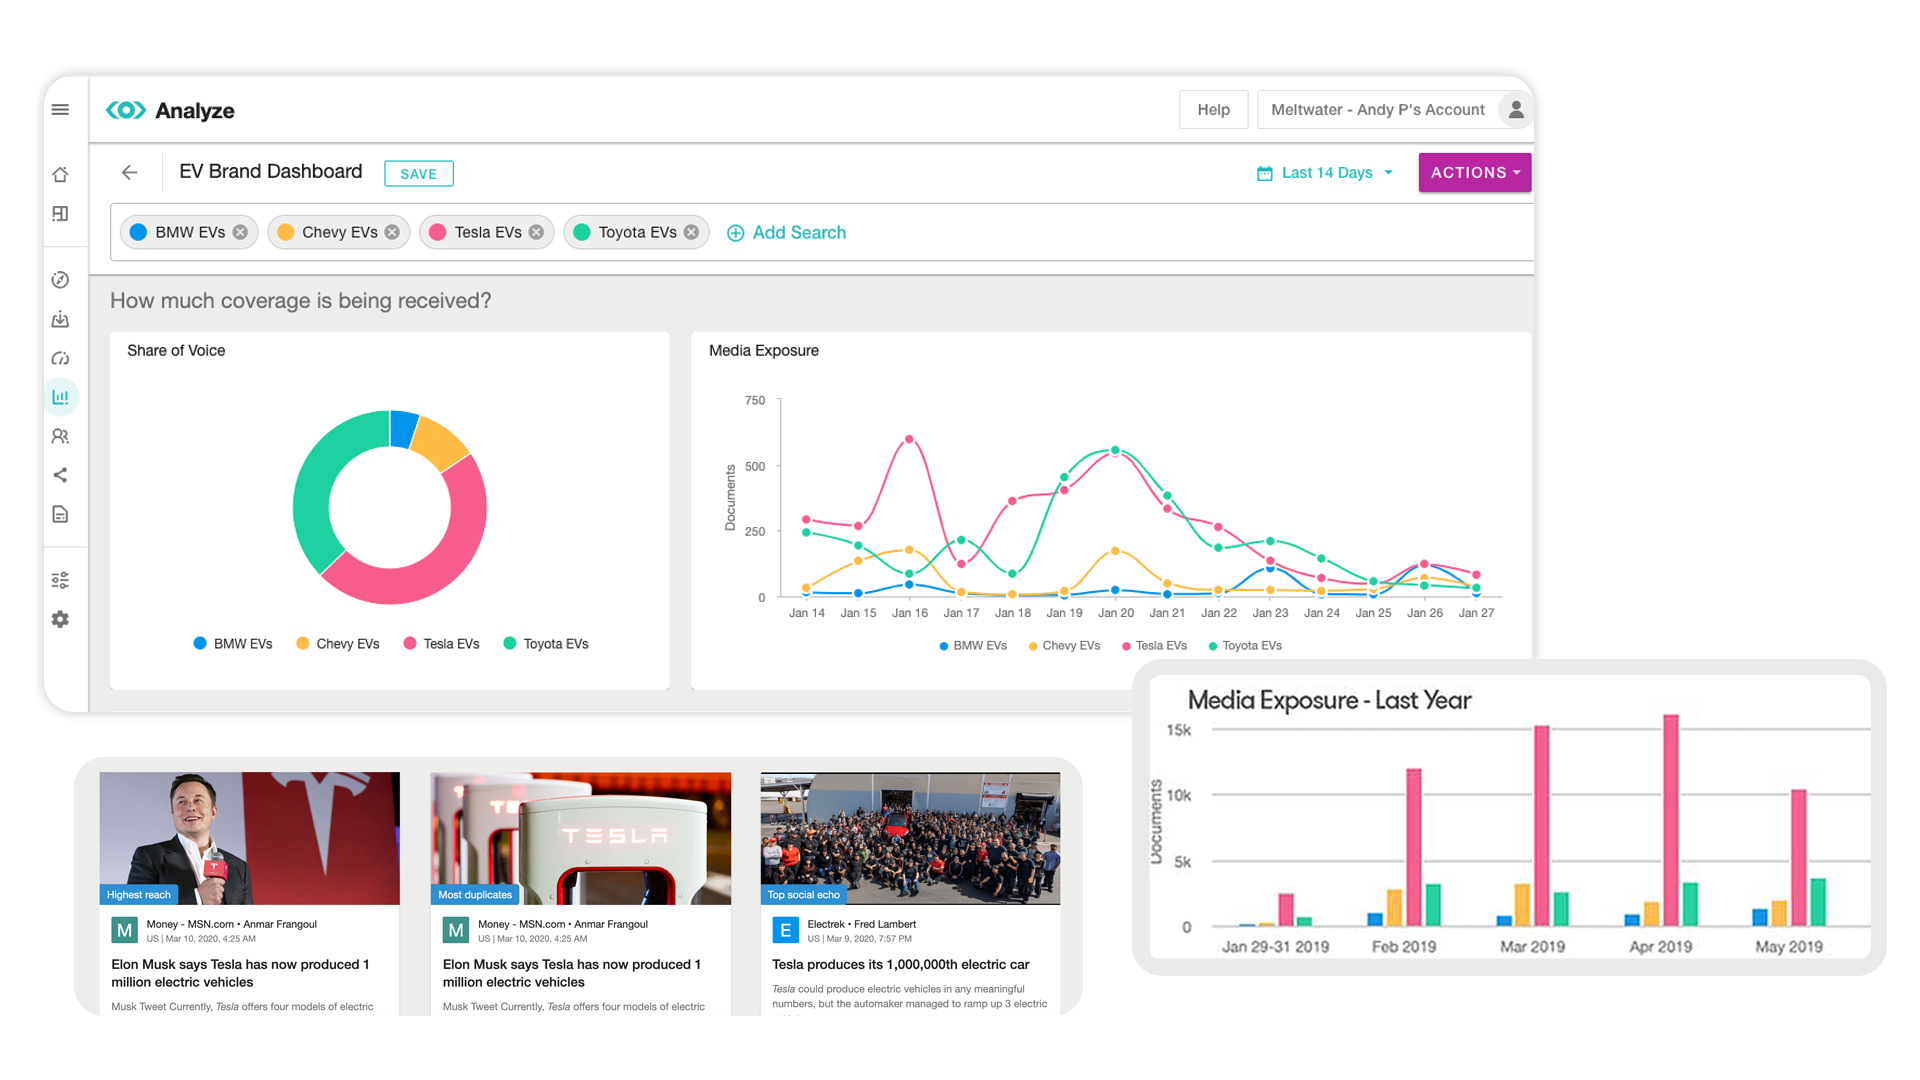 Meltwater dashboard showing analysis data with images of graphs and stories.